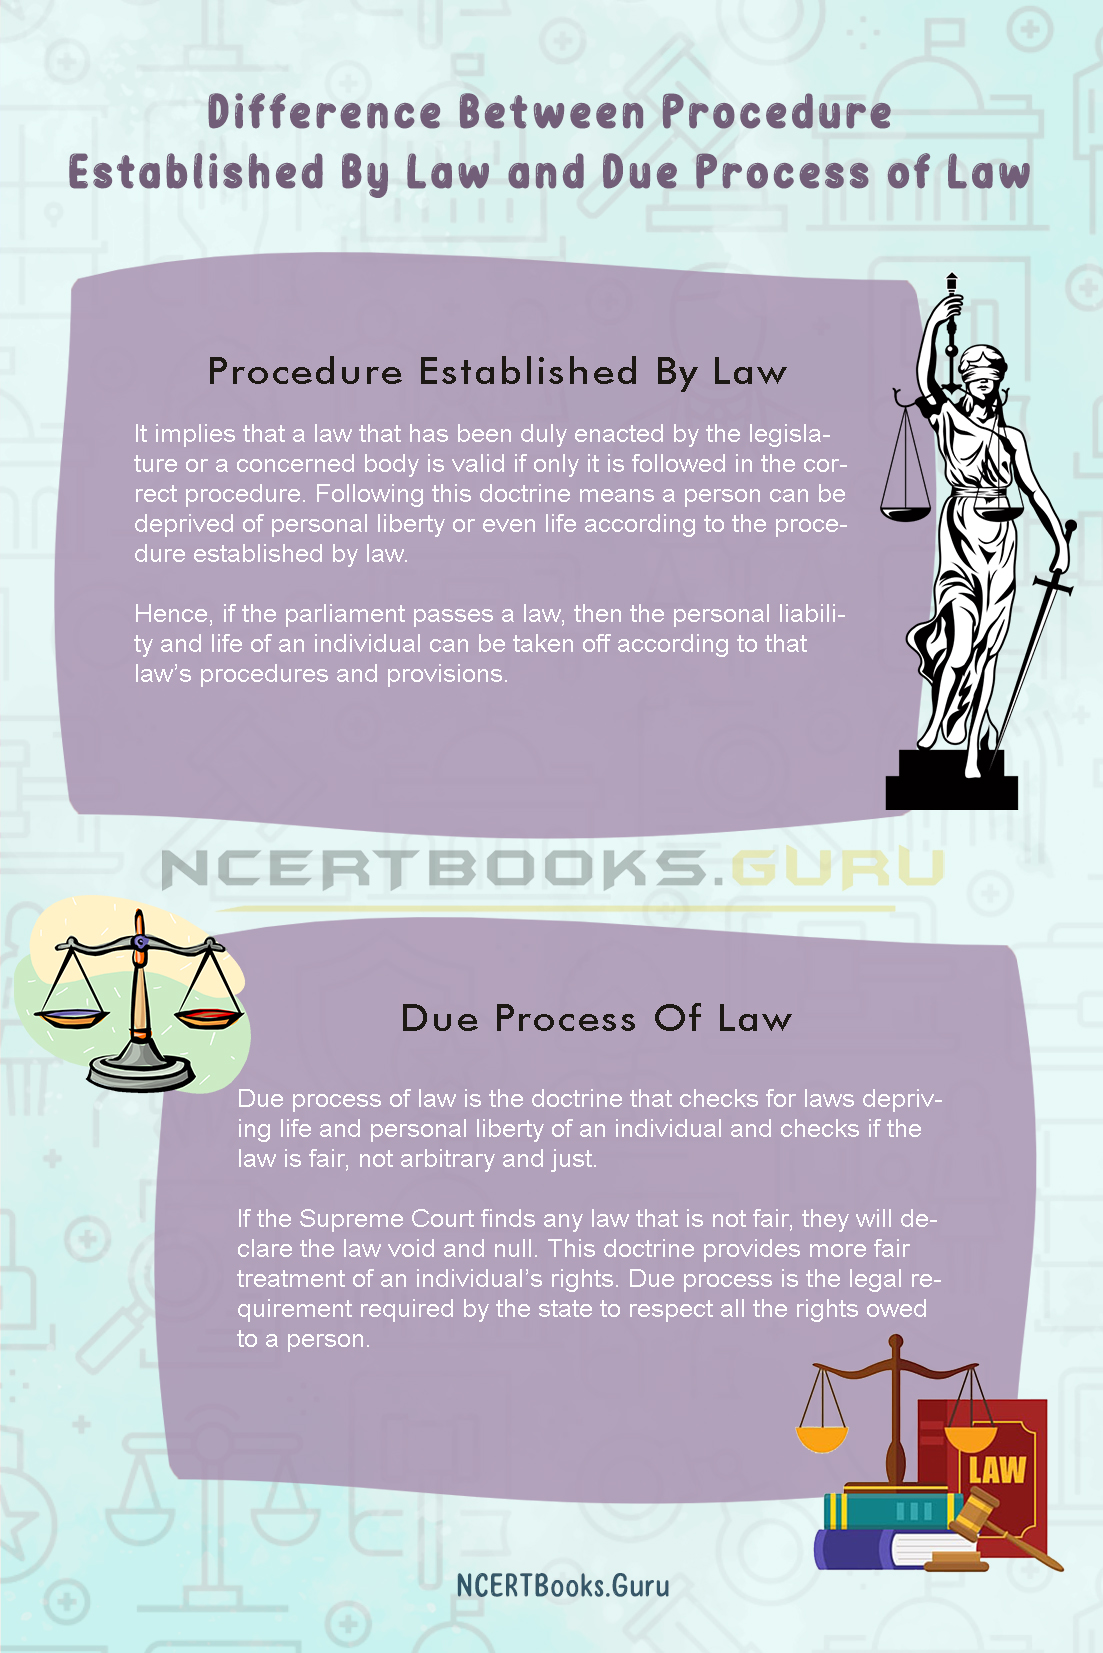 Difference Between Procedure Established By Law and Due Process of Law 1